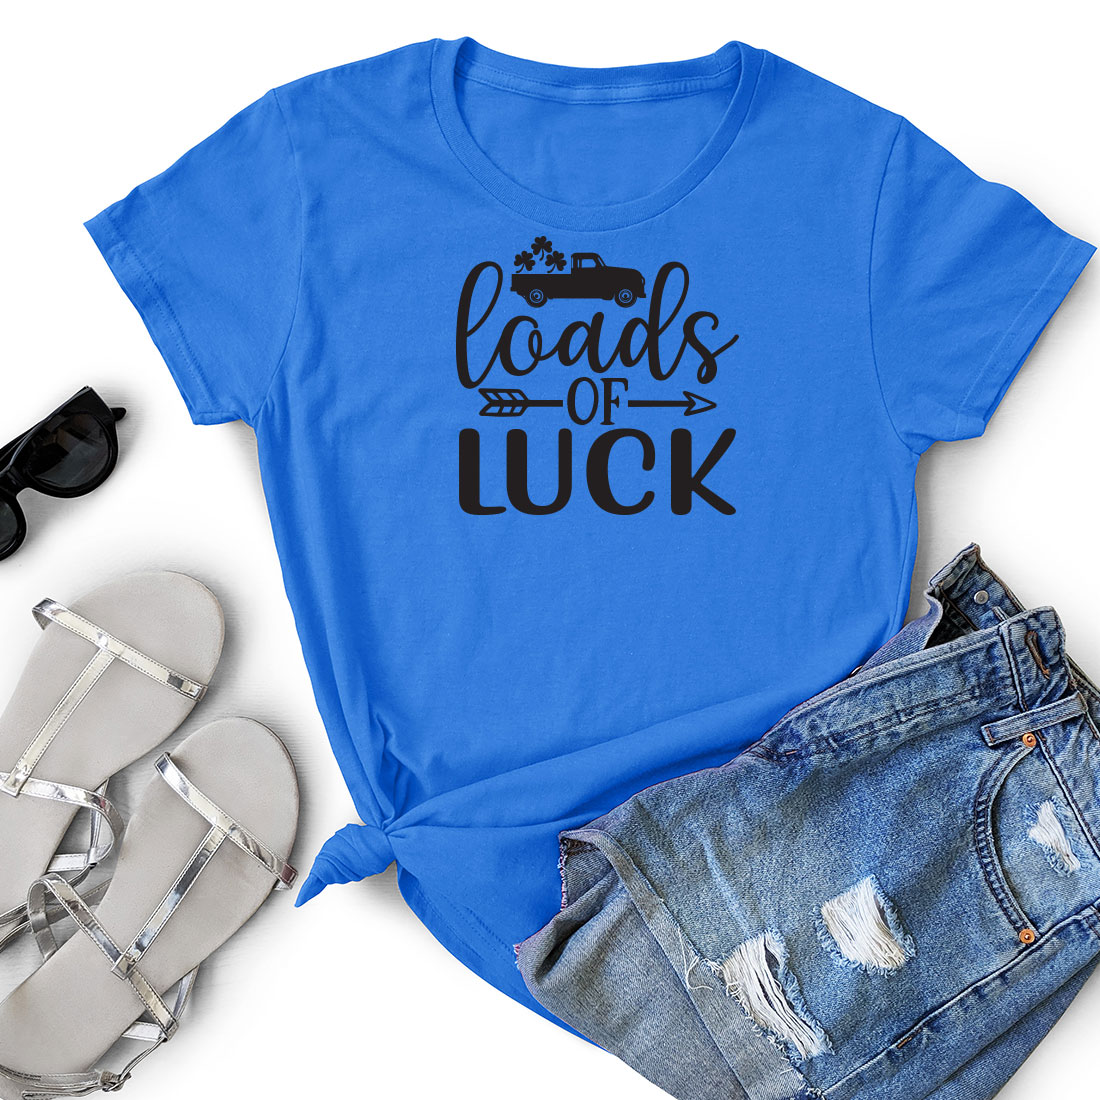 T - shirt that says loads of luck next to a pair of shorts.